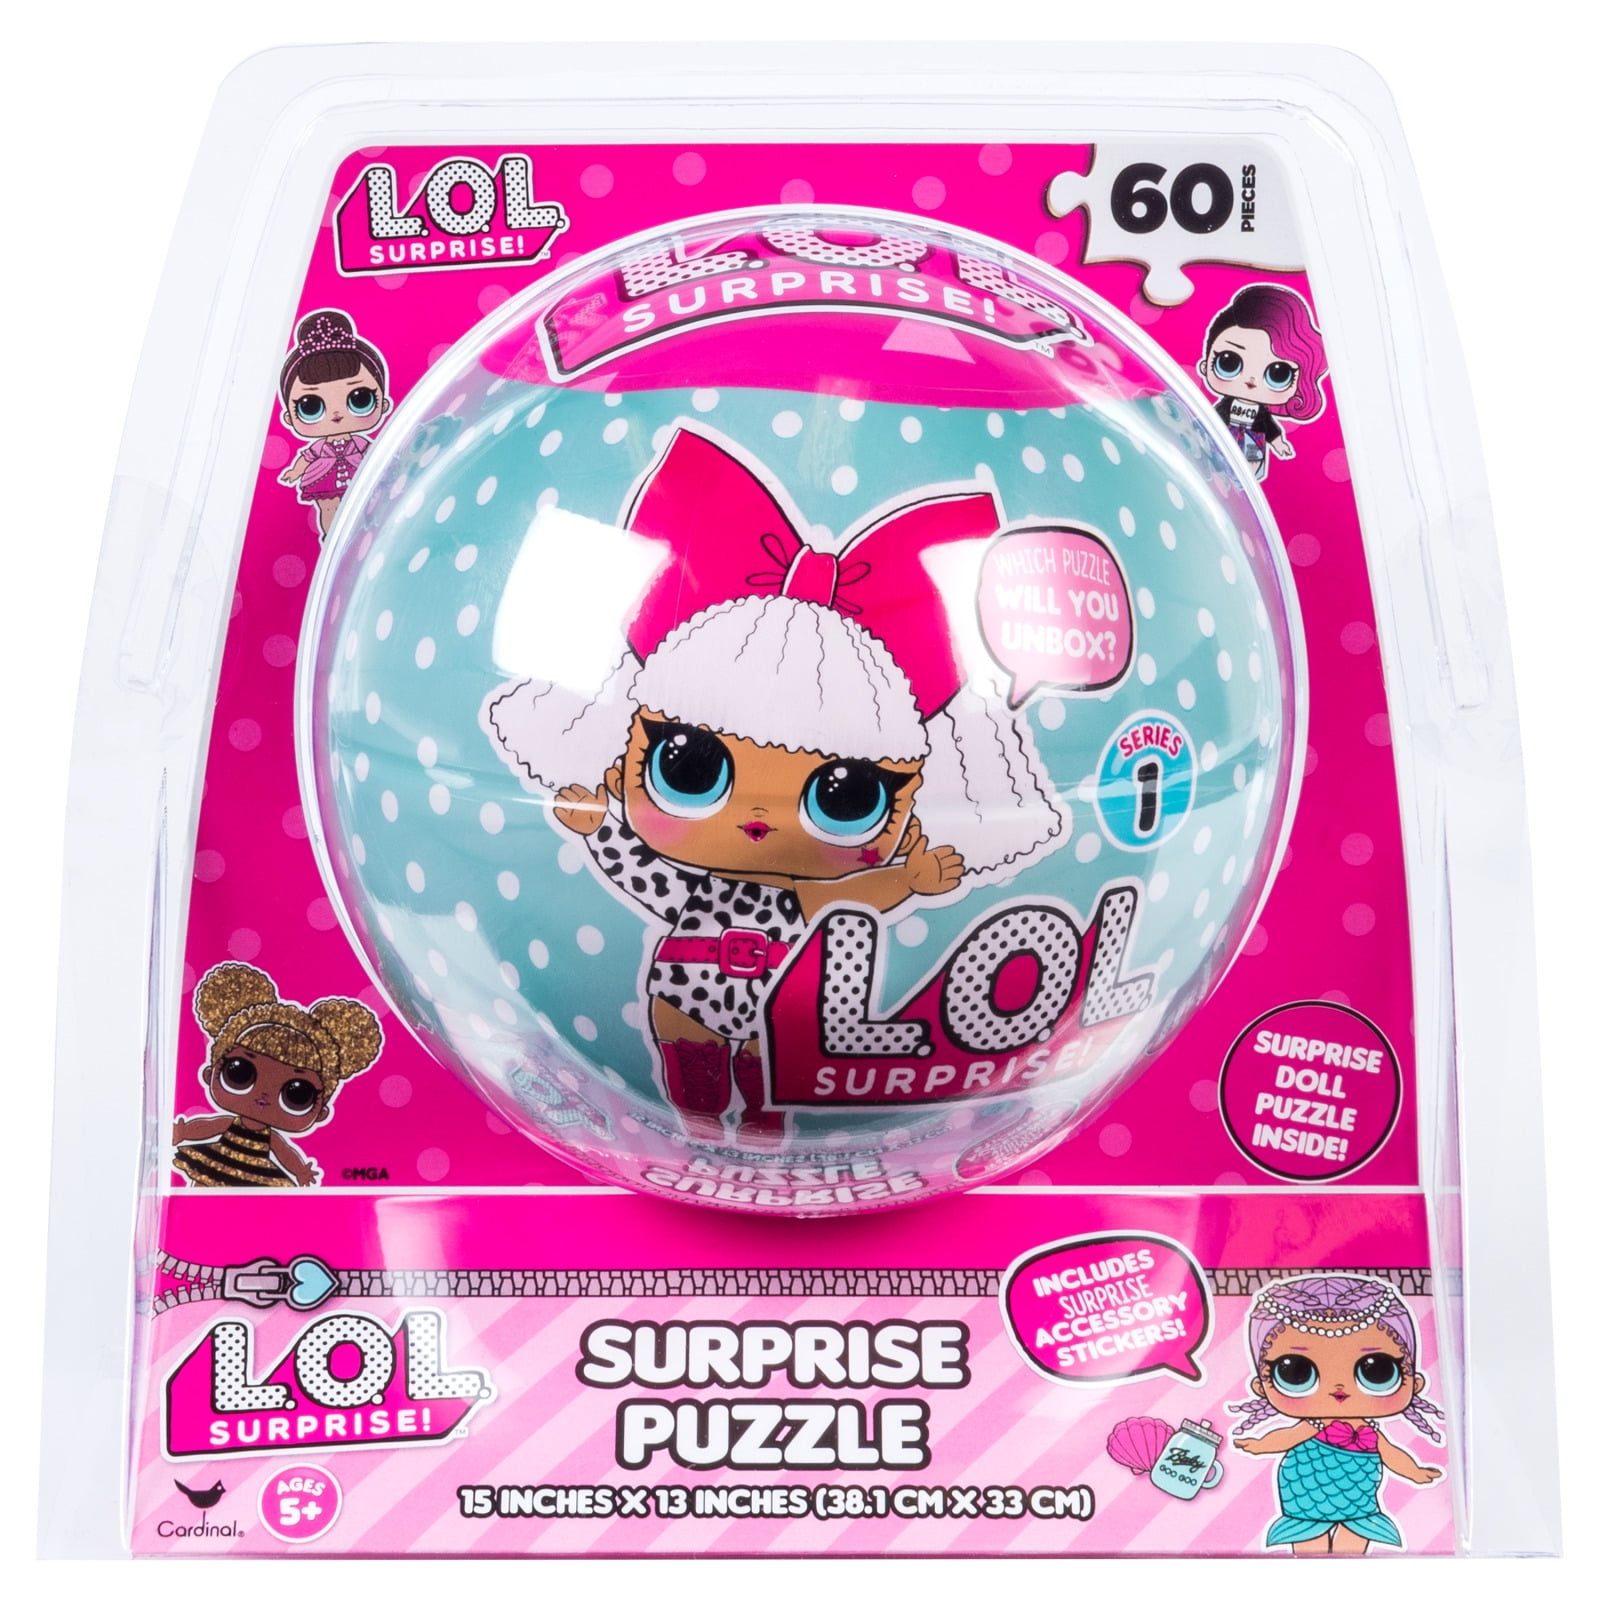 LOL Surprise Doll Puzzle Sphere 60 Pieces with Accessory Stickers 15" x 13" NEW 